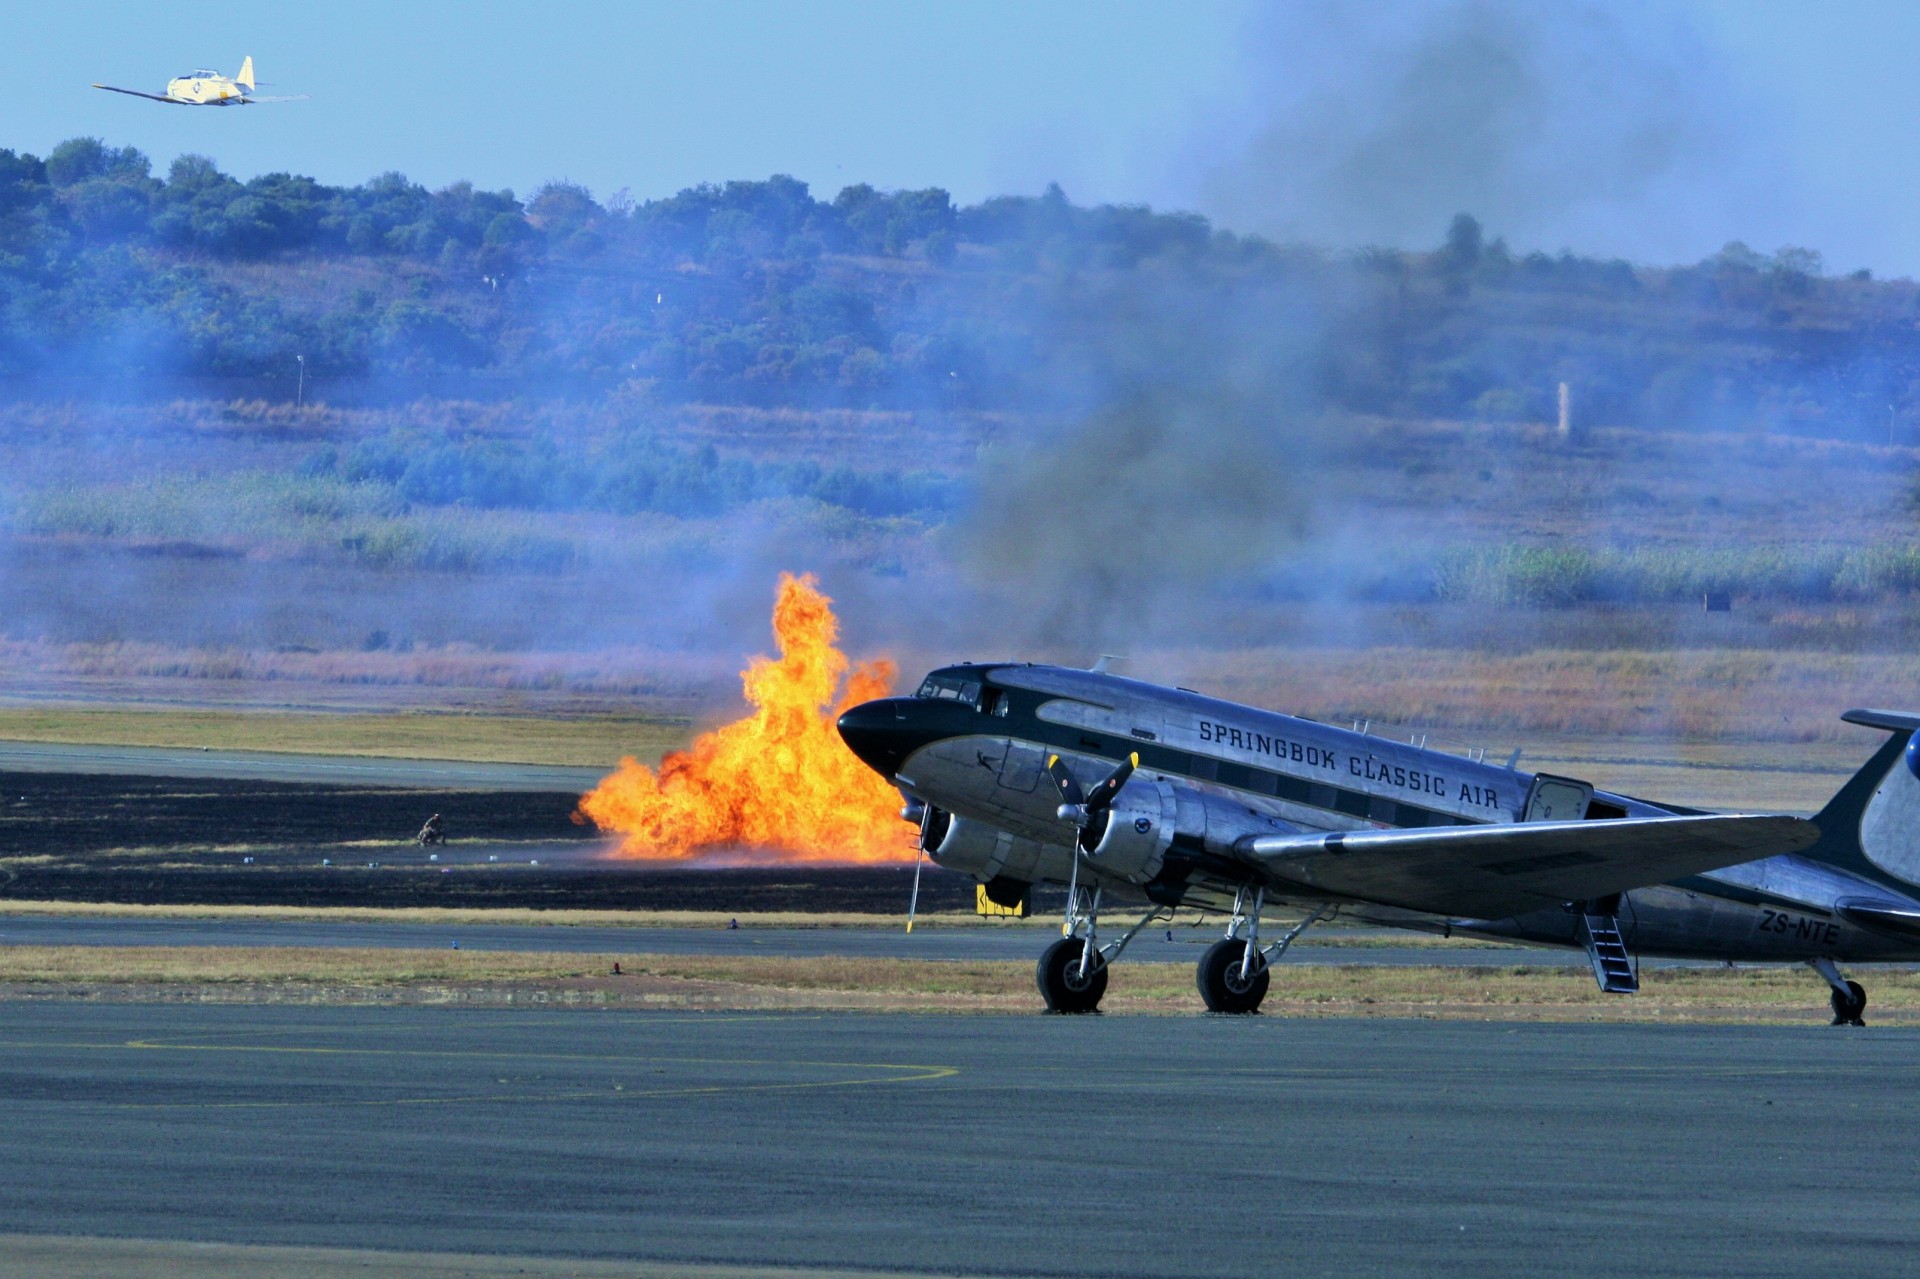 airfield flames pyrotechnics free photo